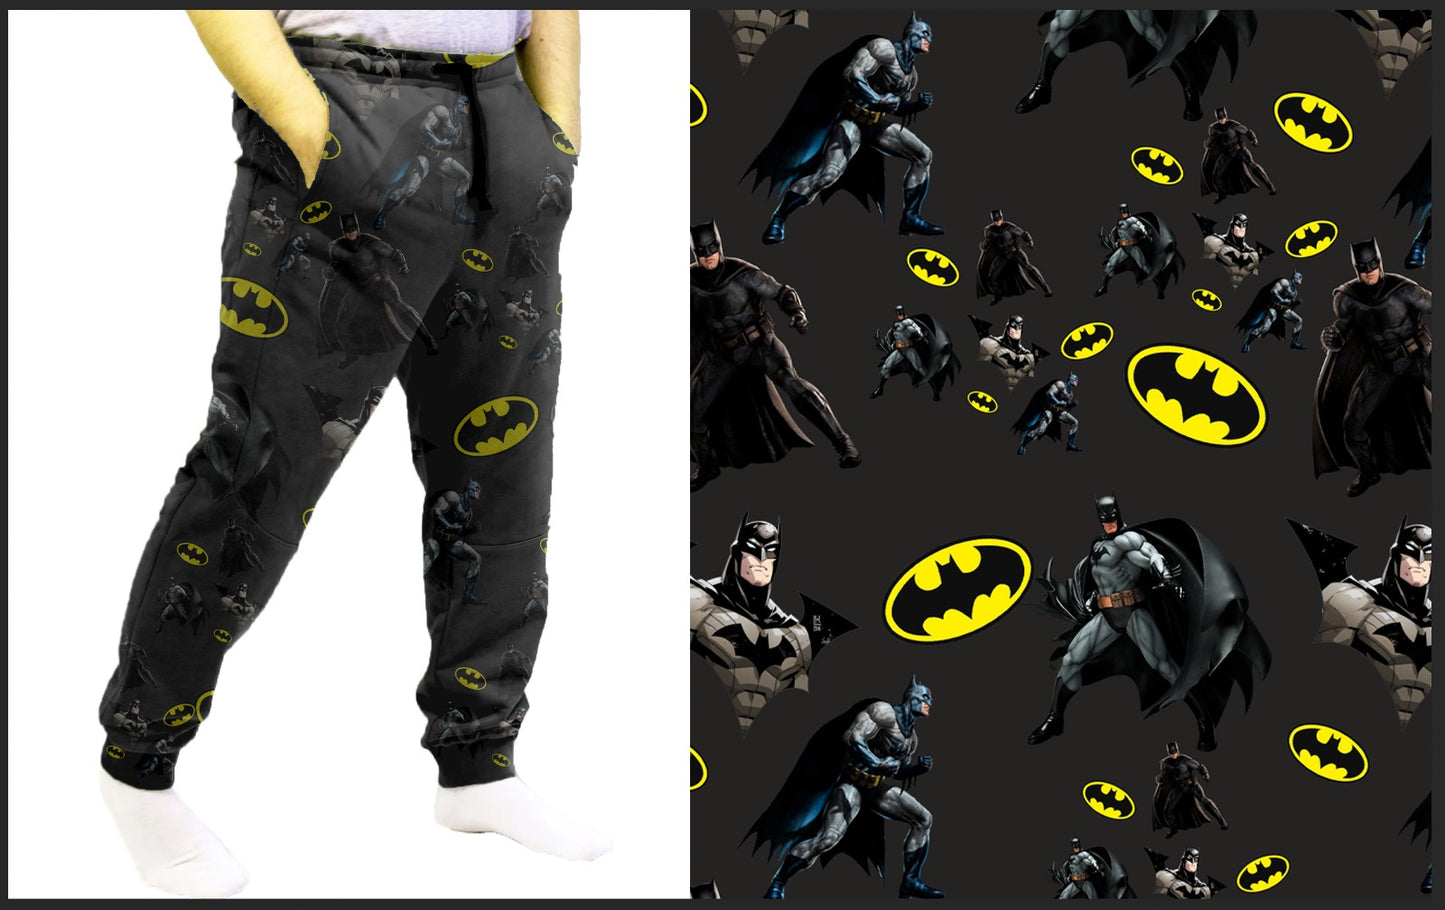 The Bat leggings, joggers, loungers, and 4"-7" jogger shorts with pockets